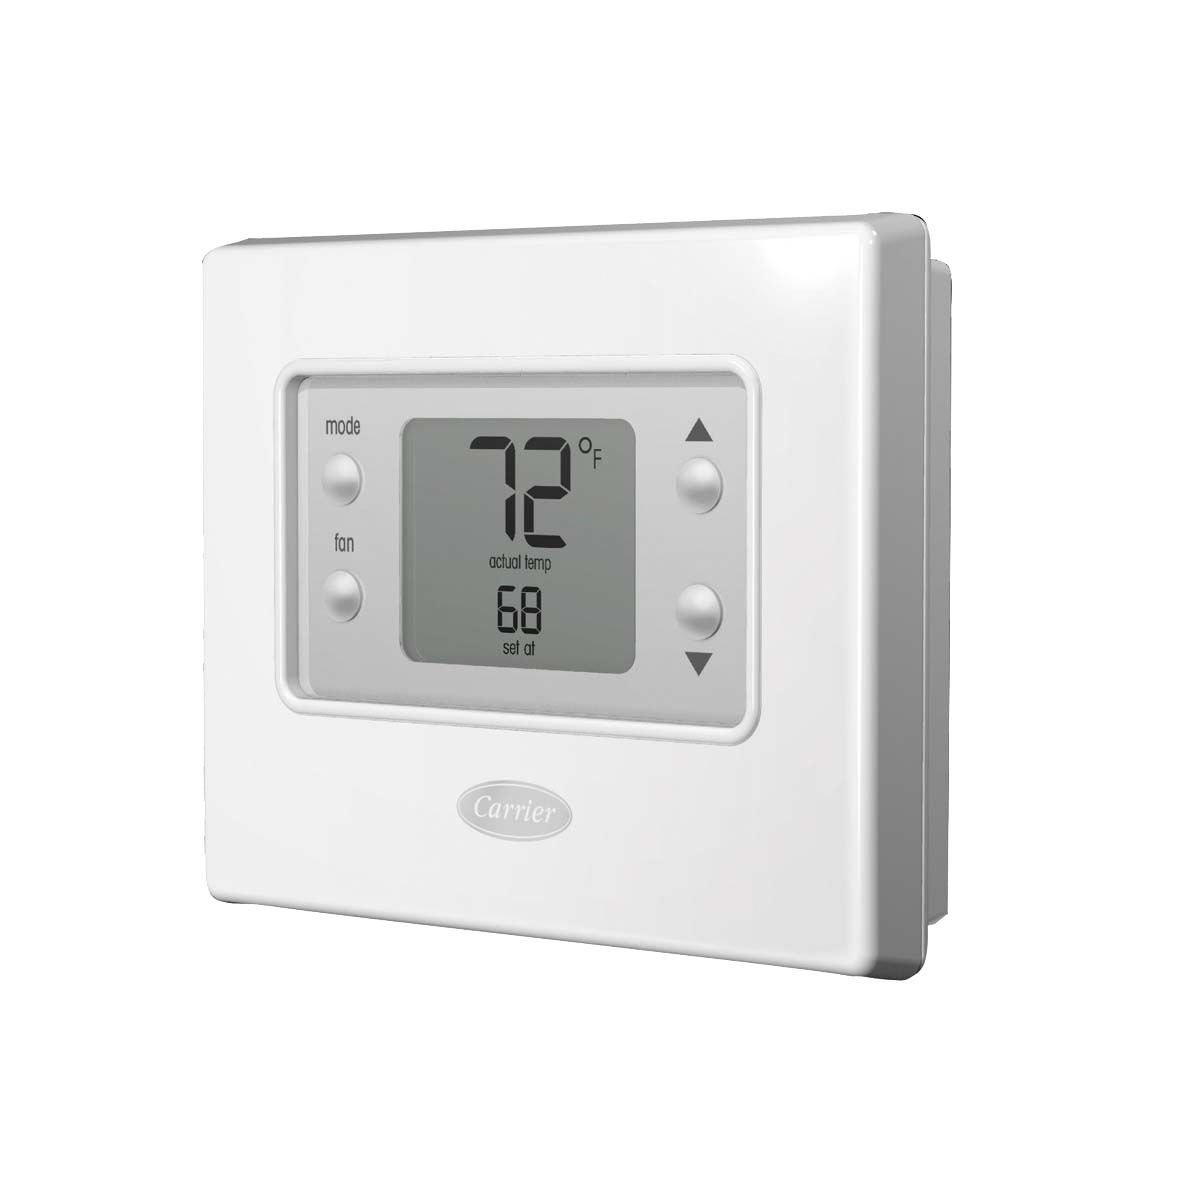 comfort-non-programmable-thermostat-tc-nac01-a-carrier-home-comfort